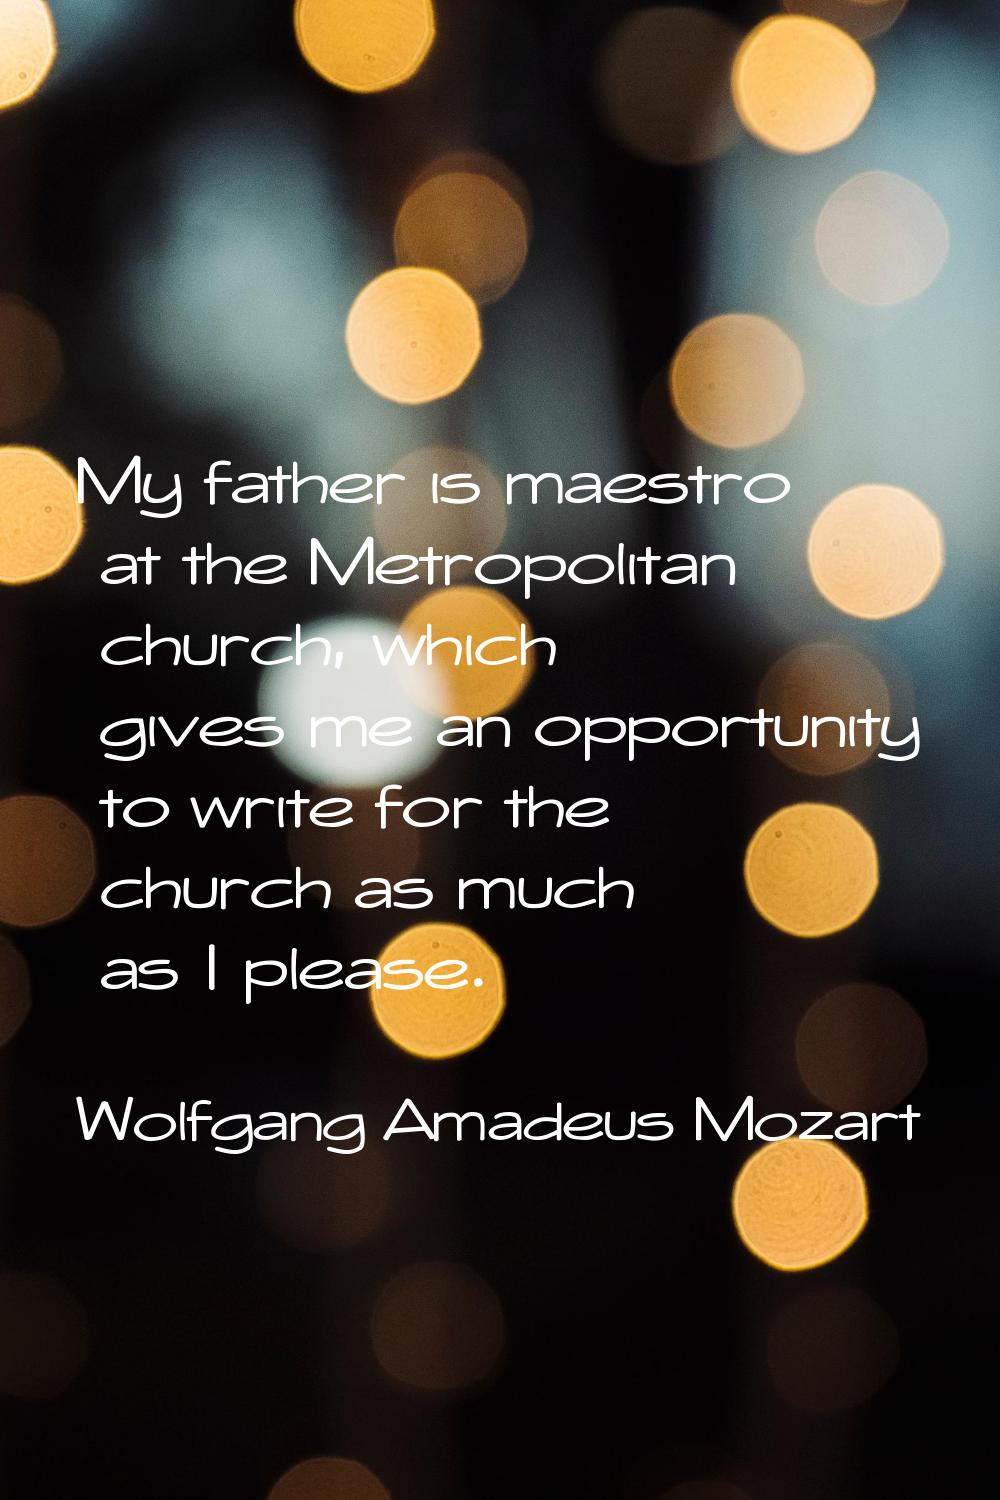 My father is maestro at the Metropolitan church, which gives me an opportunity to write for the chu